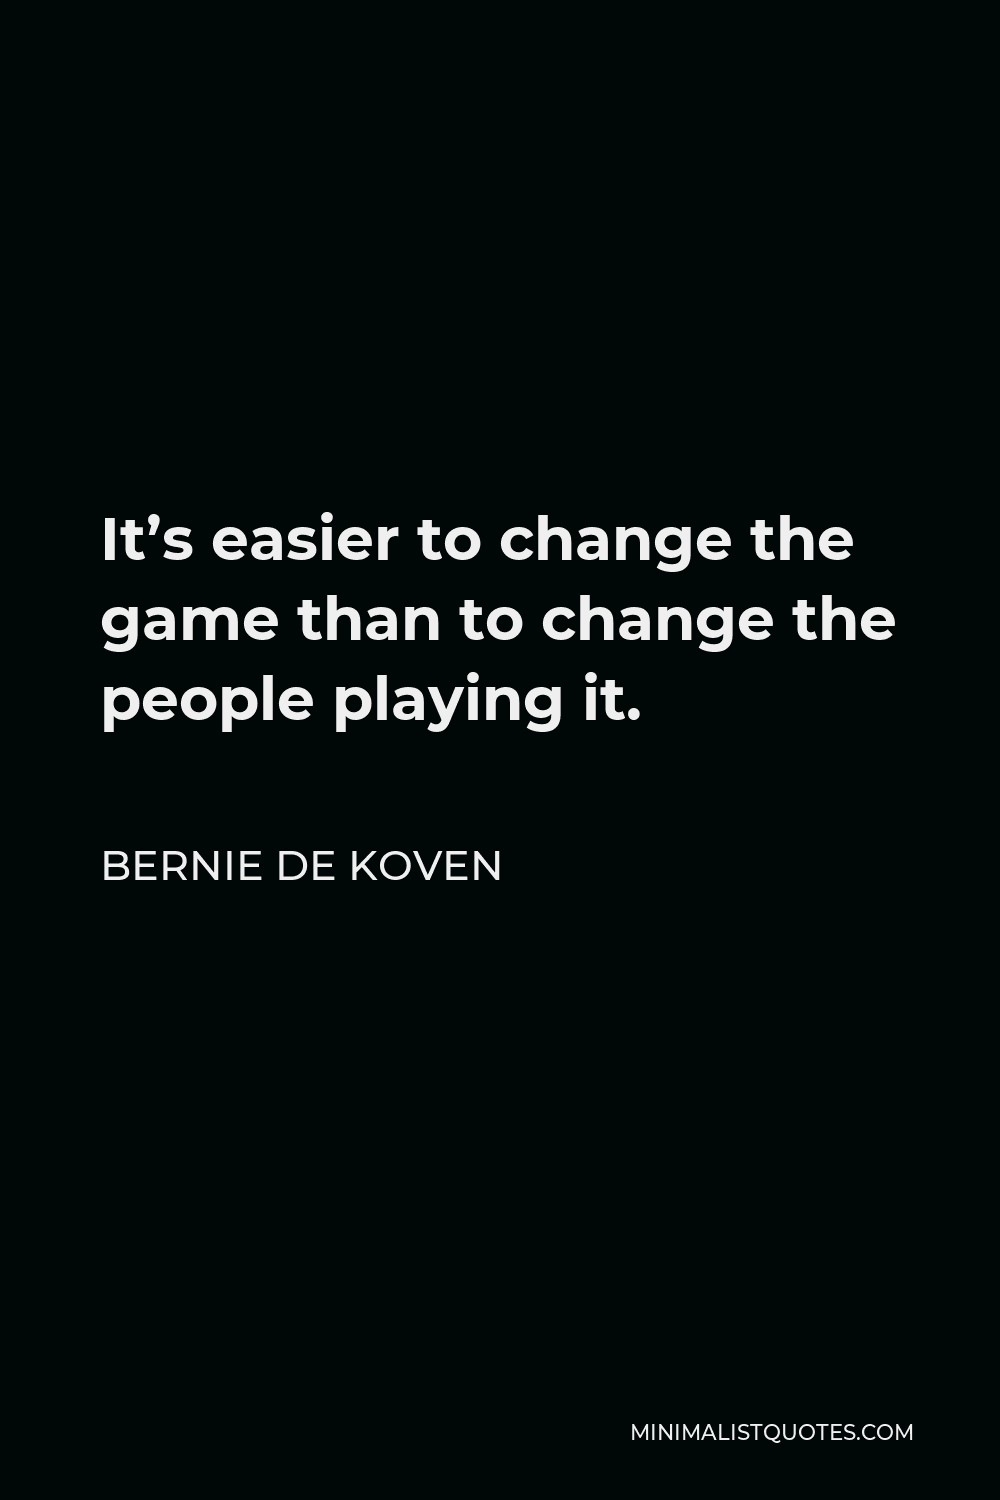 Bernie De Koven Quote - It’s easier to change the game than to change the people playing it.